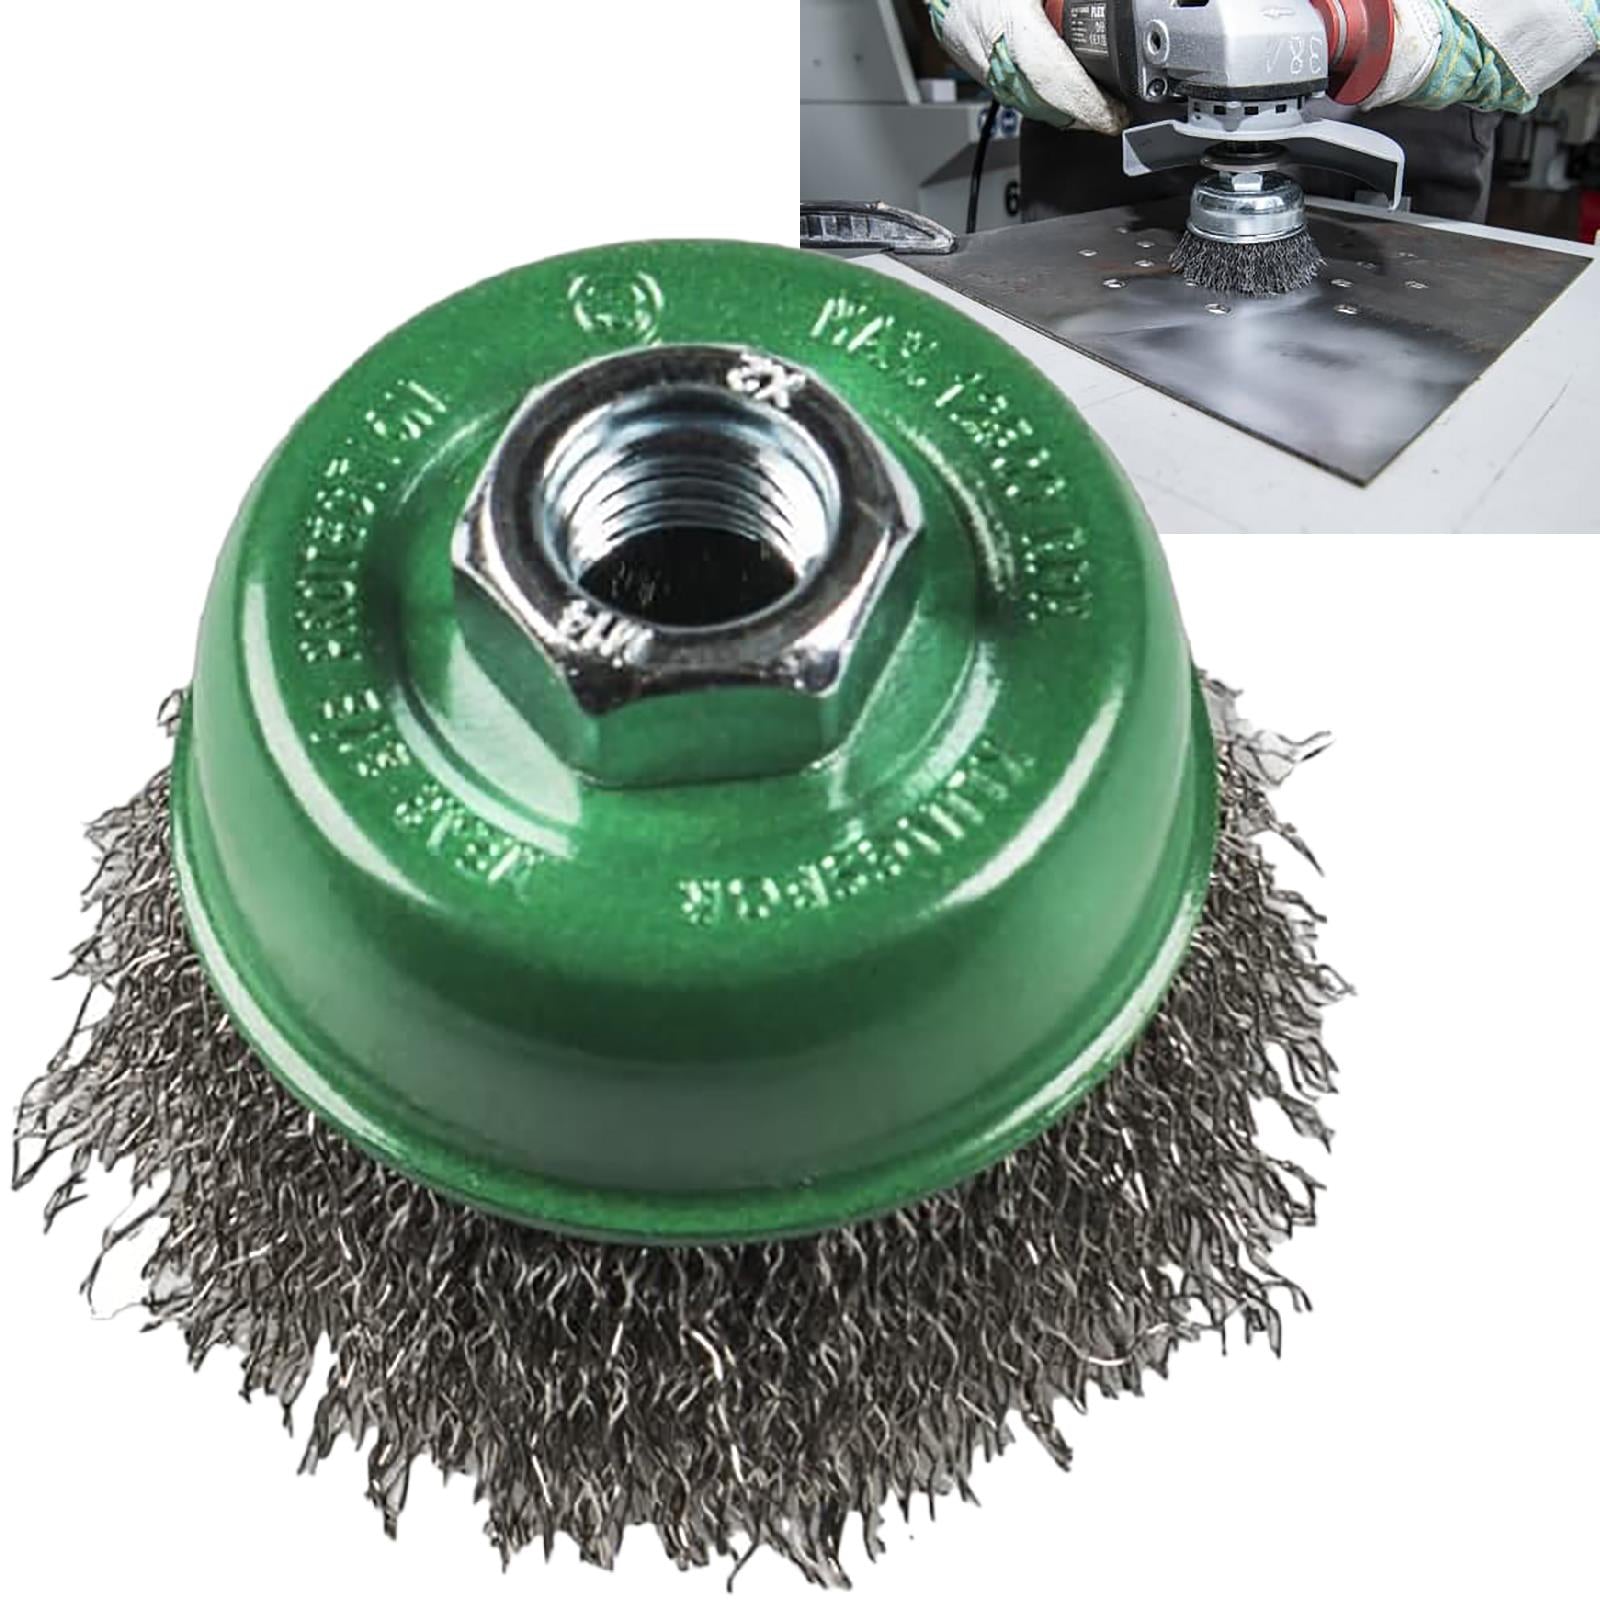 Klingspor Crimped Wire Cup Brush 65mm 80mm M14 Stainless Steel BT600W